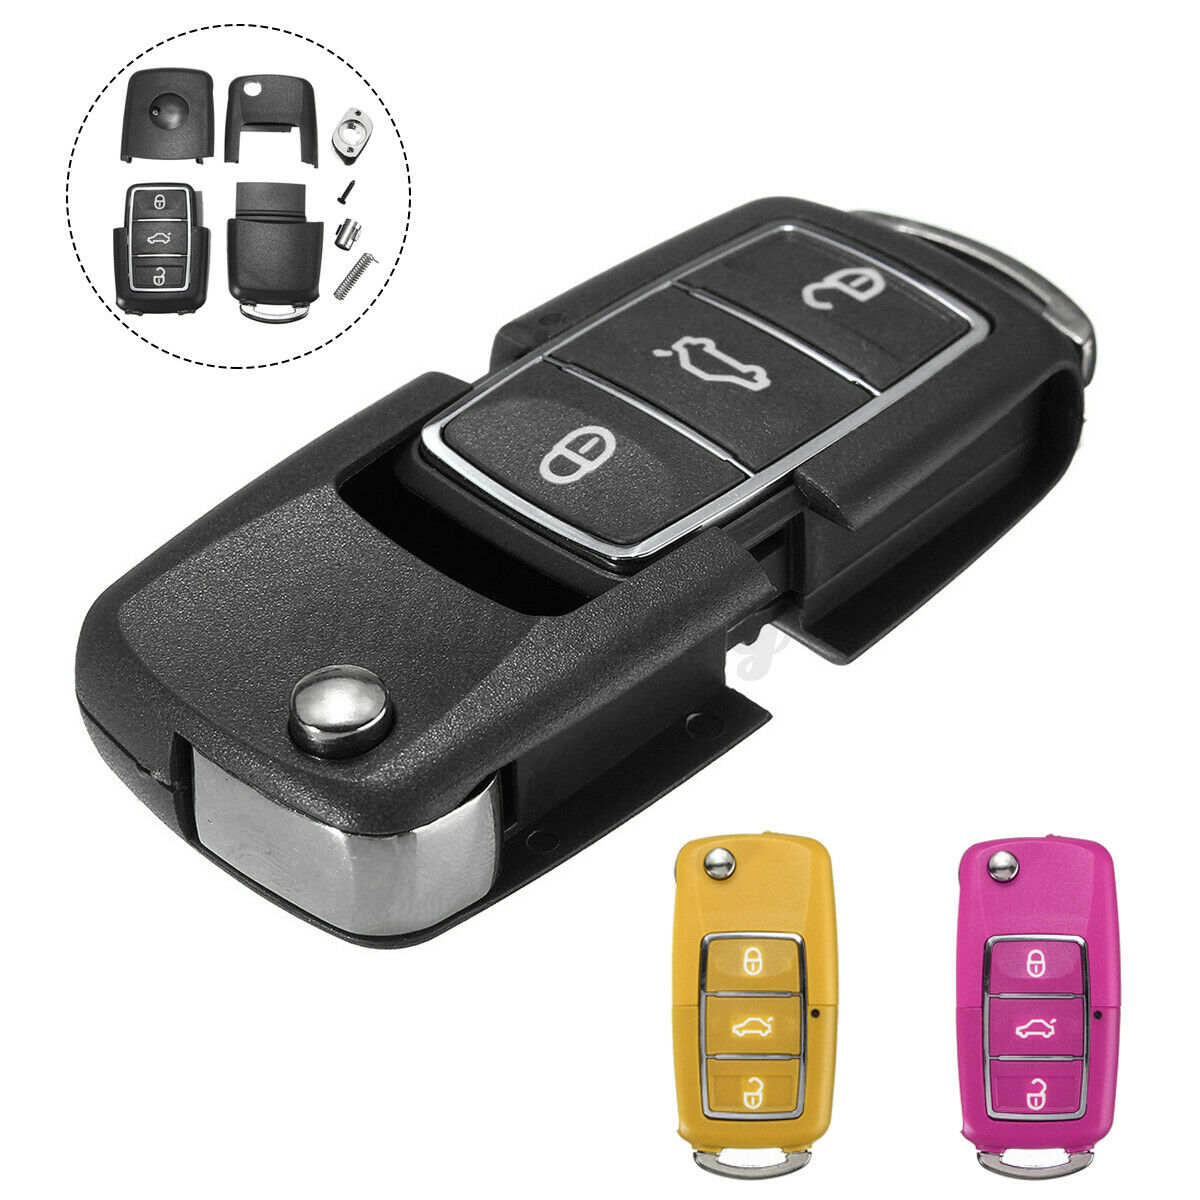 

3 Button Colorful Key Fob Case Shell Cover For VW Golf Passat Beetle Bora Polo, Black